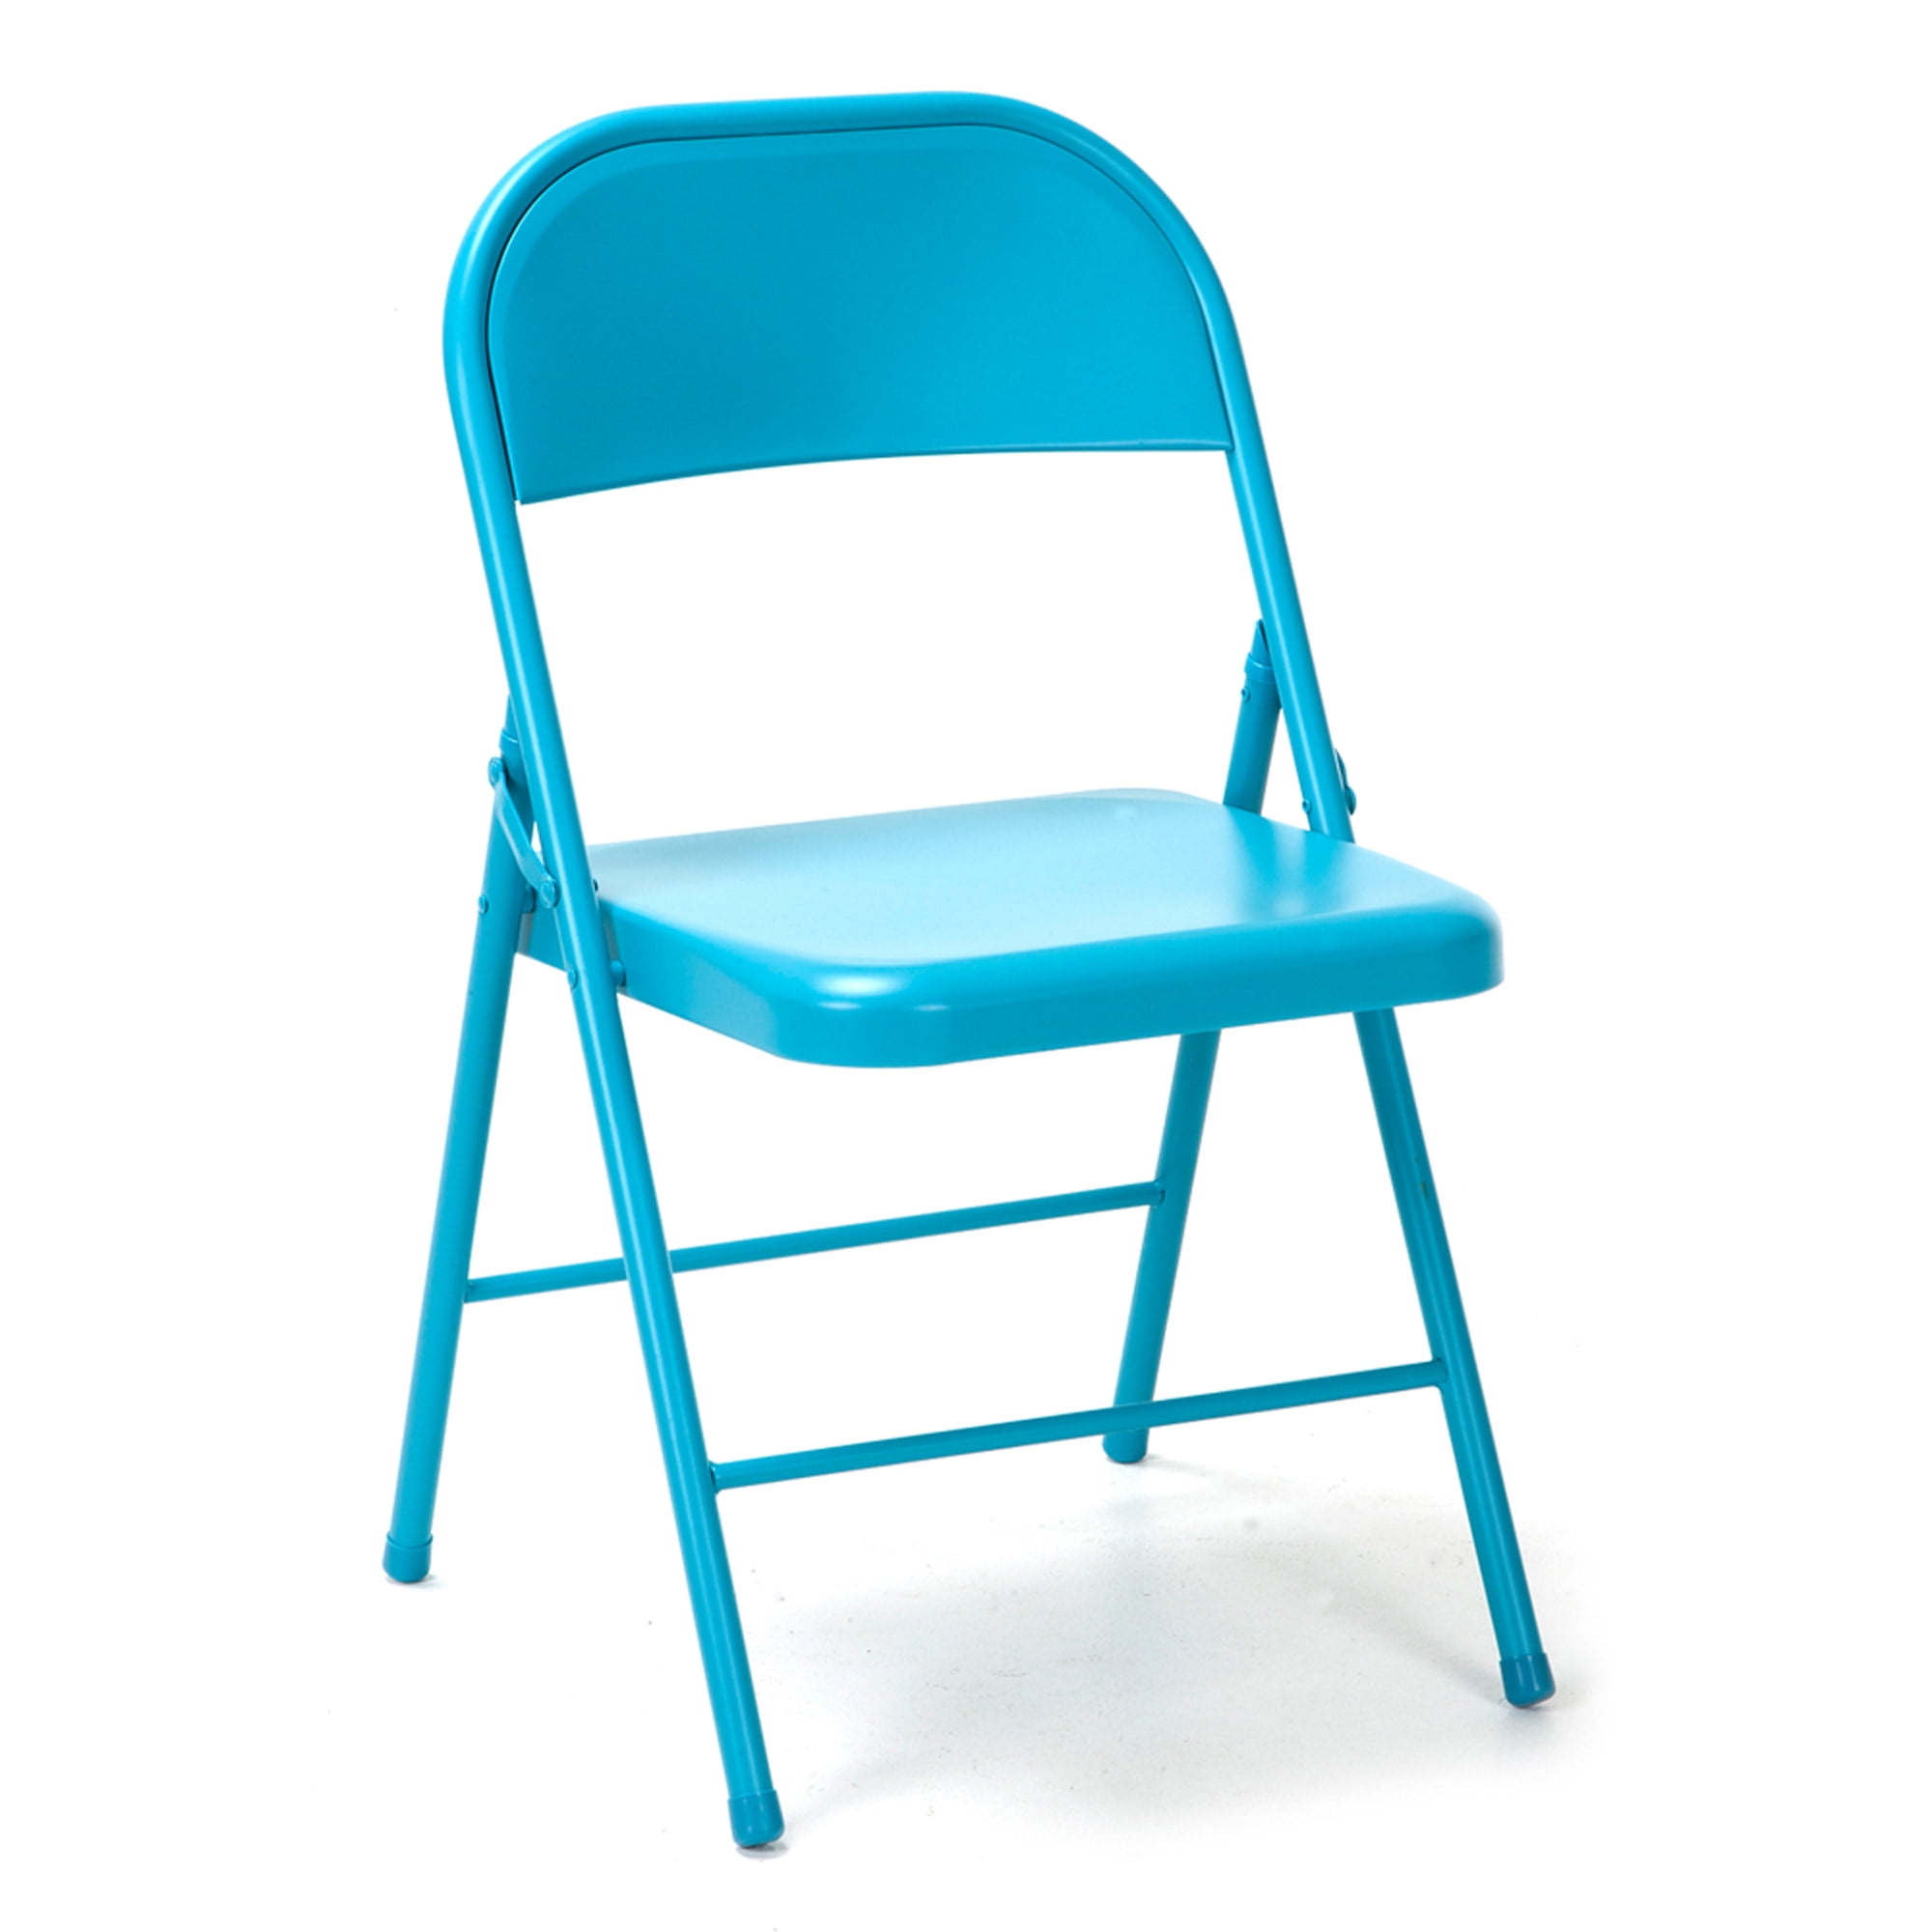 blue fold up chair